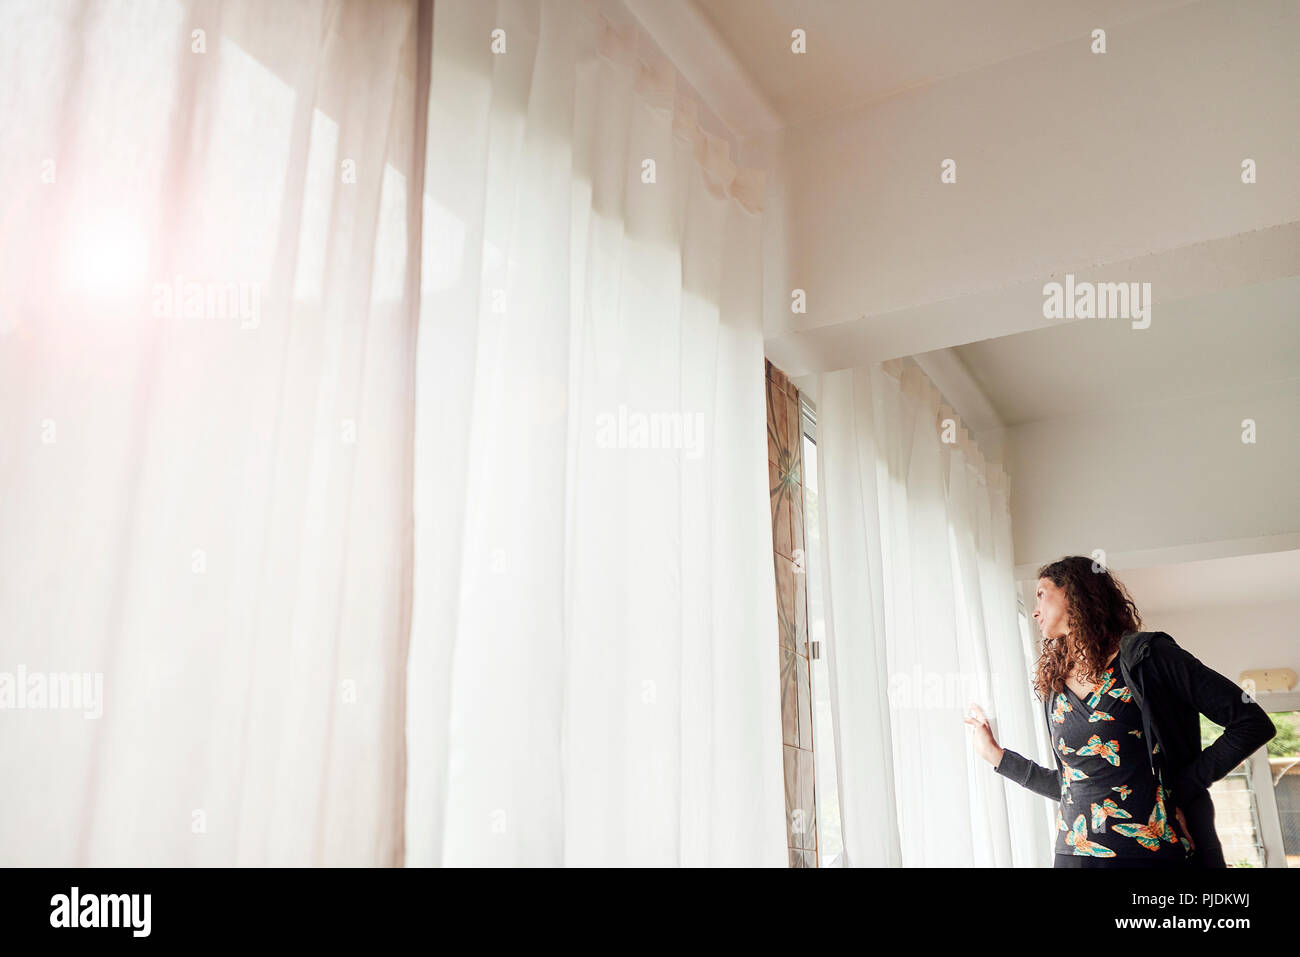 Woman peering out through net curtained window Stock Photo